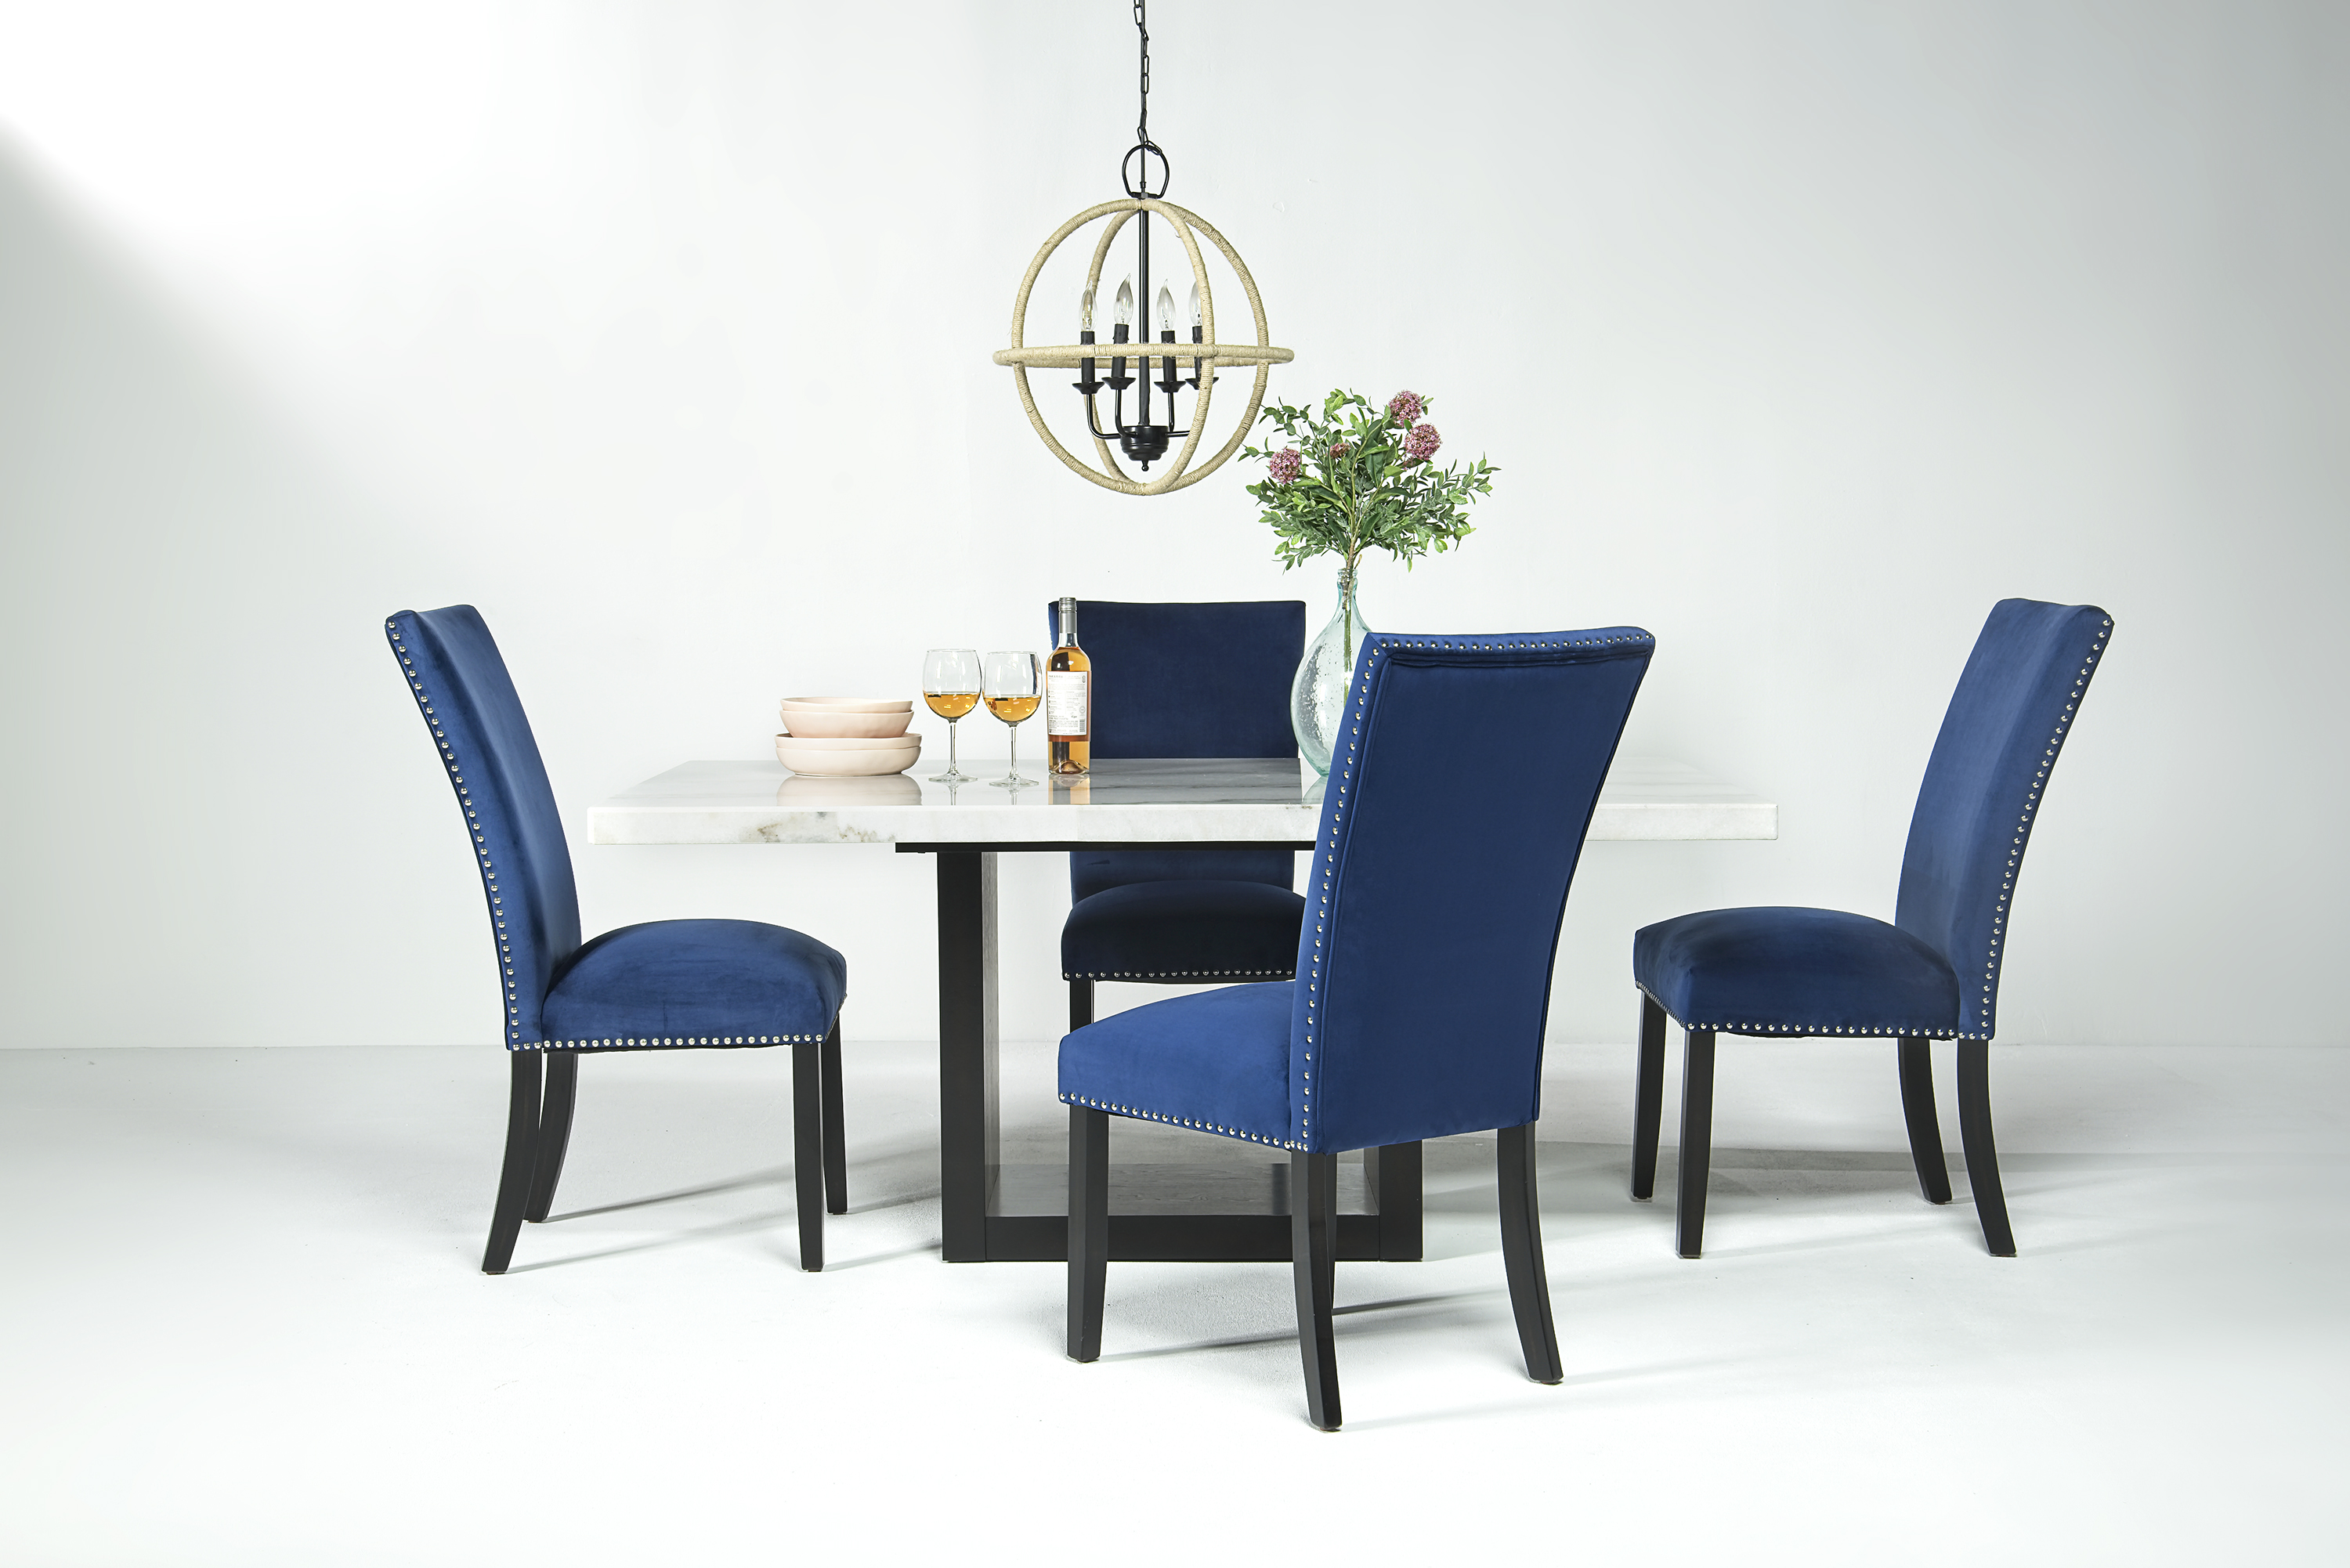 Francisco Dining Table 4 Chairs In, Mor Dining Room Chairs With Arms For Elderly